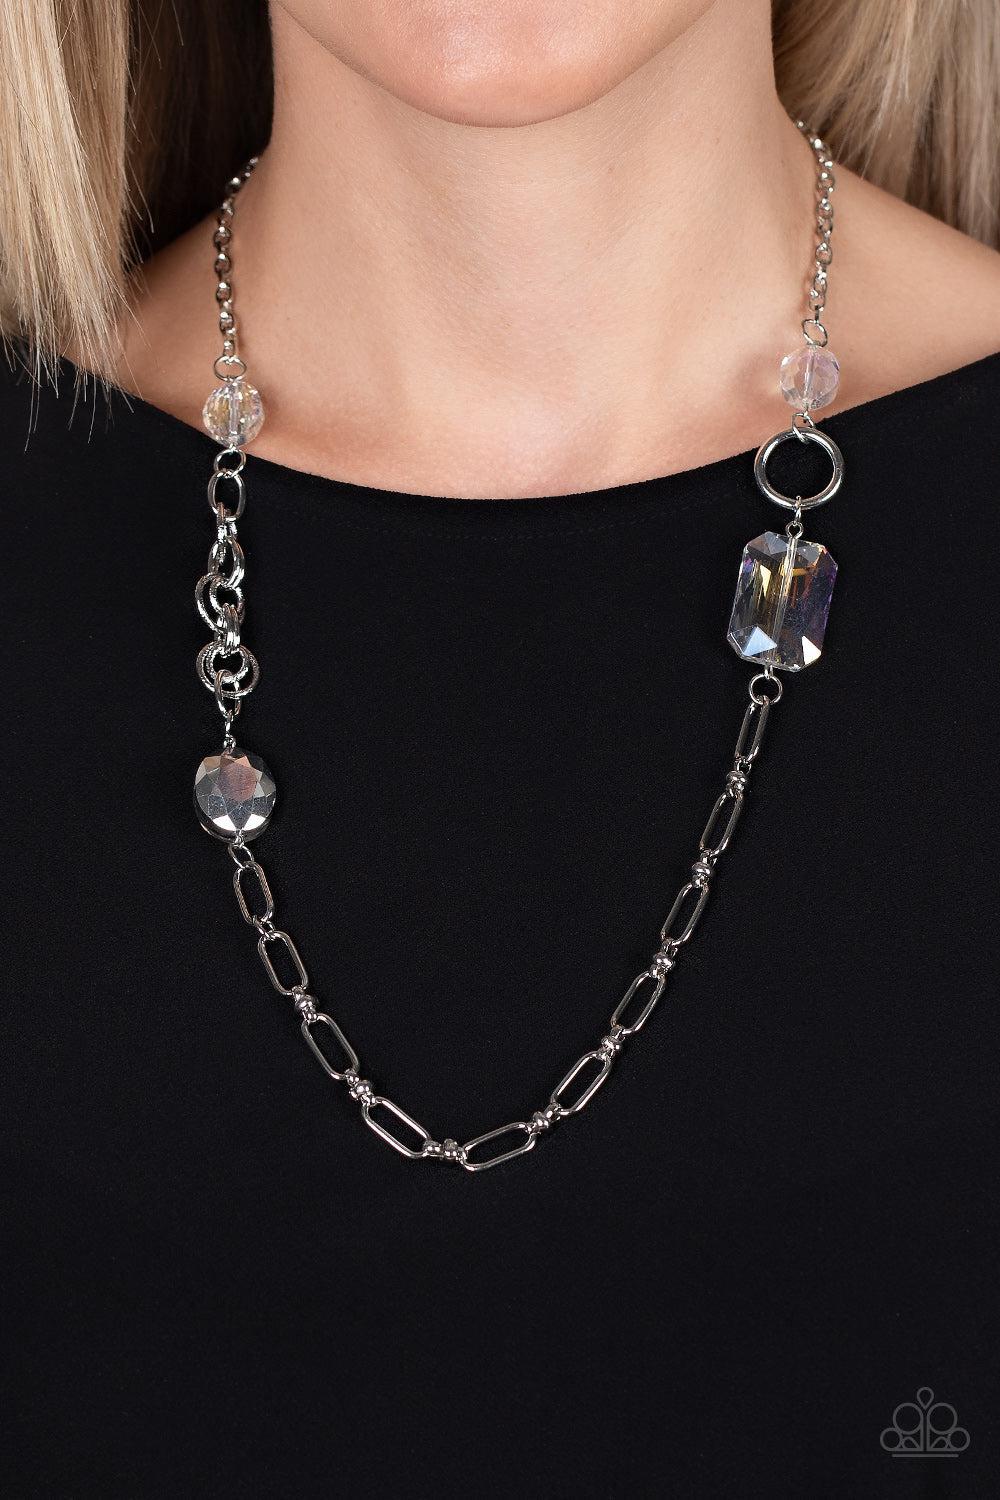 Famous and Fabulous Multi Iridescent Gem Necklace - Paparazzi Accessories-on model - CarasShop.com - $5 Jewelry by Cara Jewels